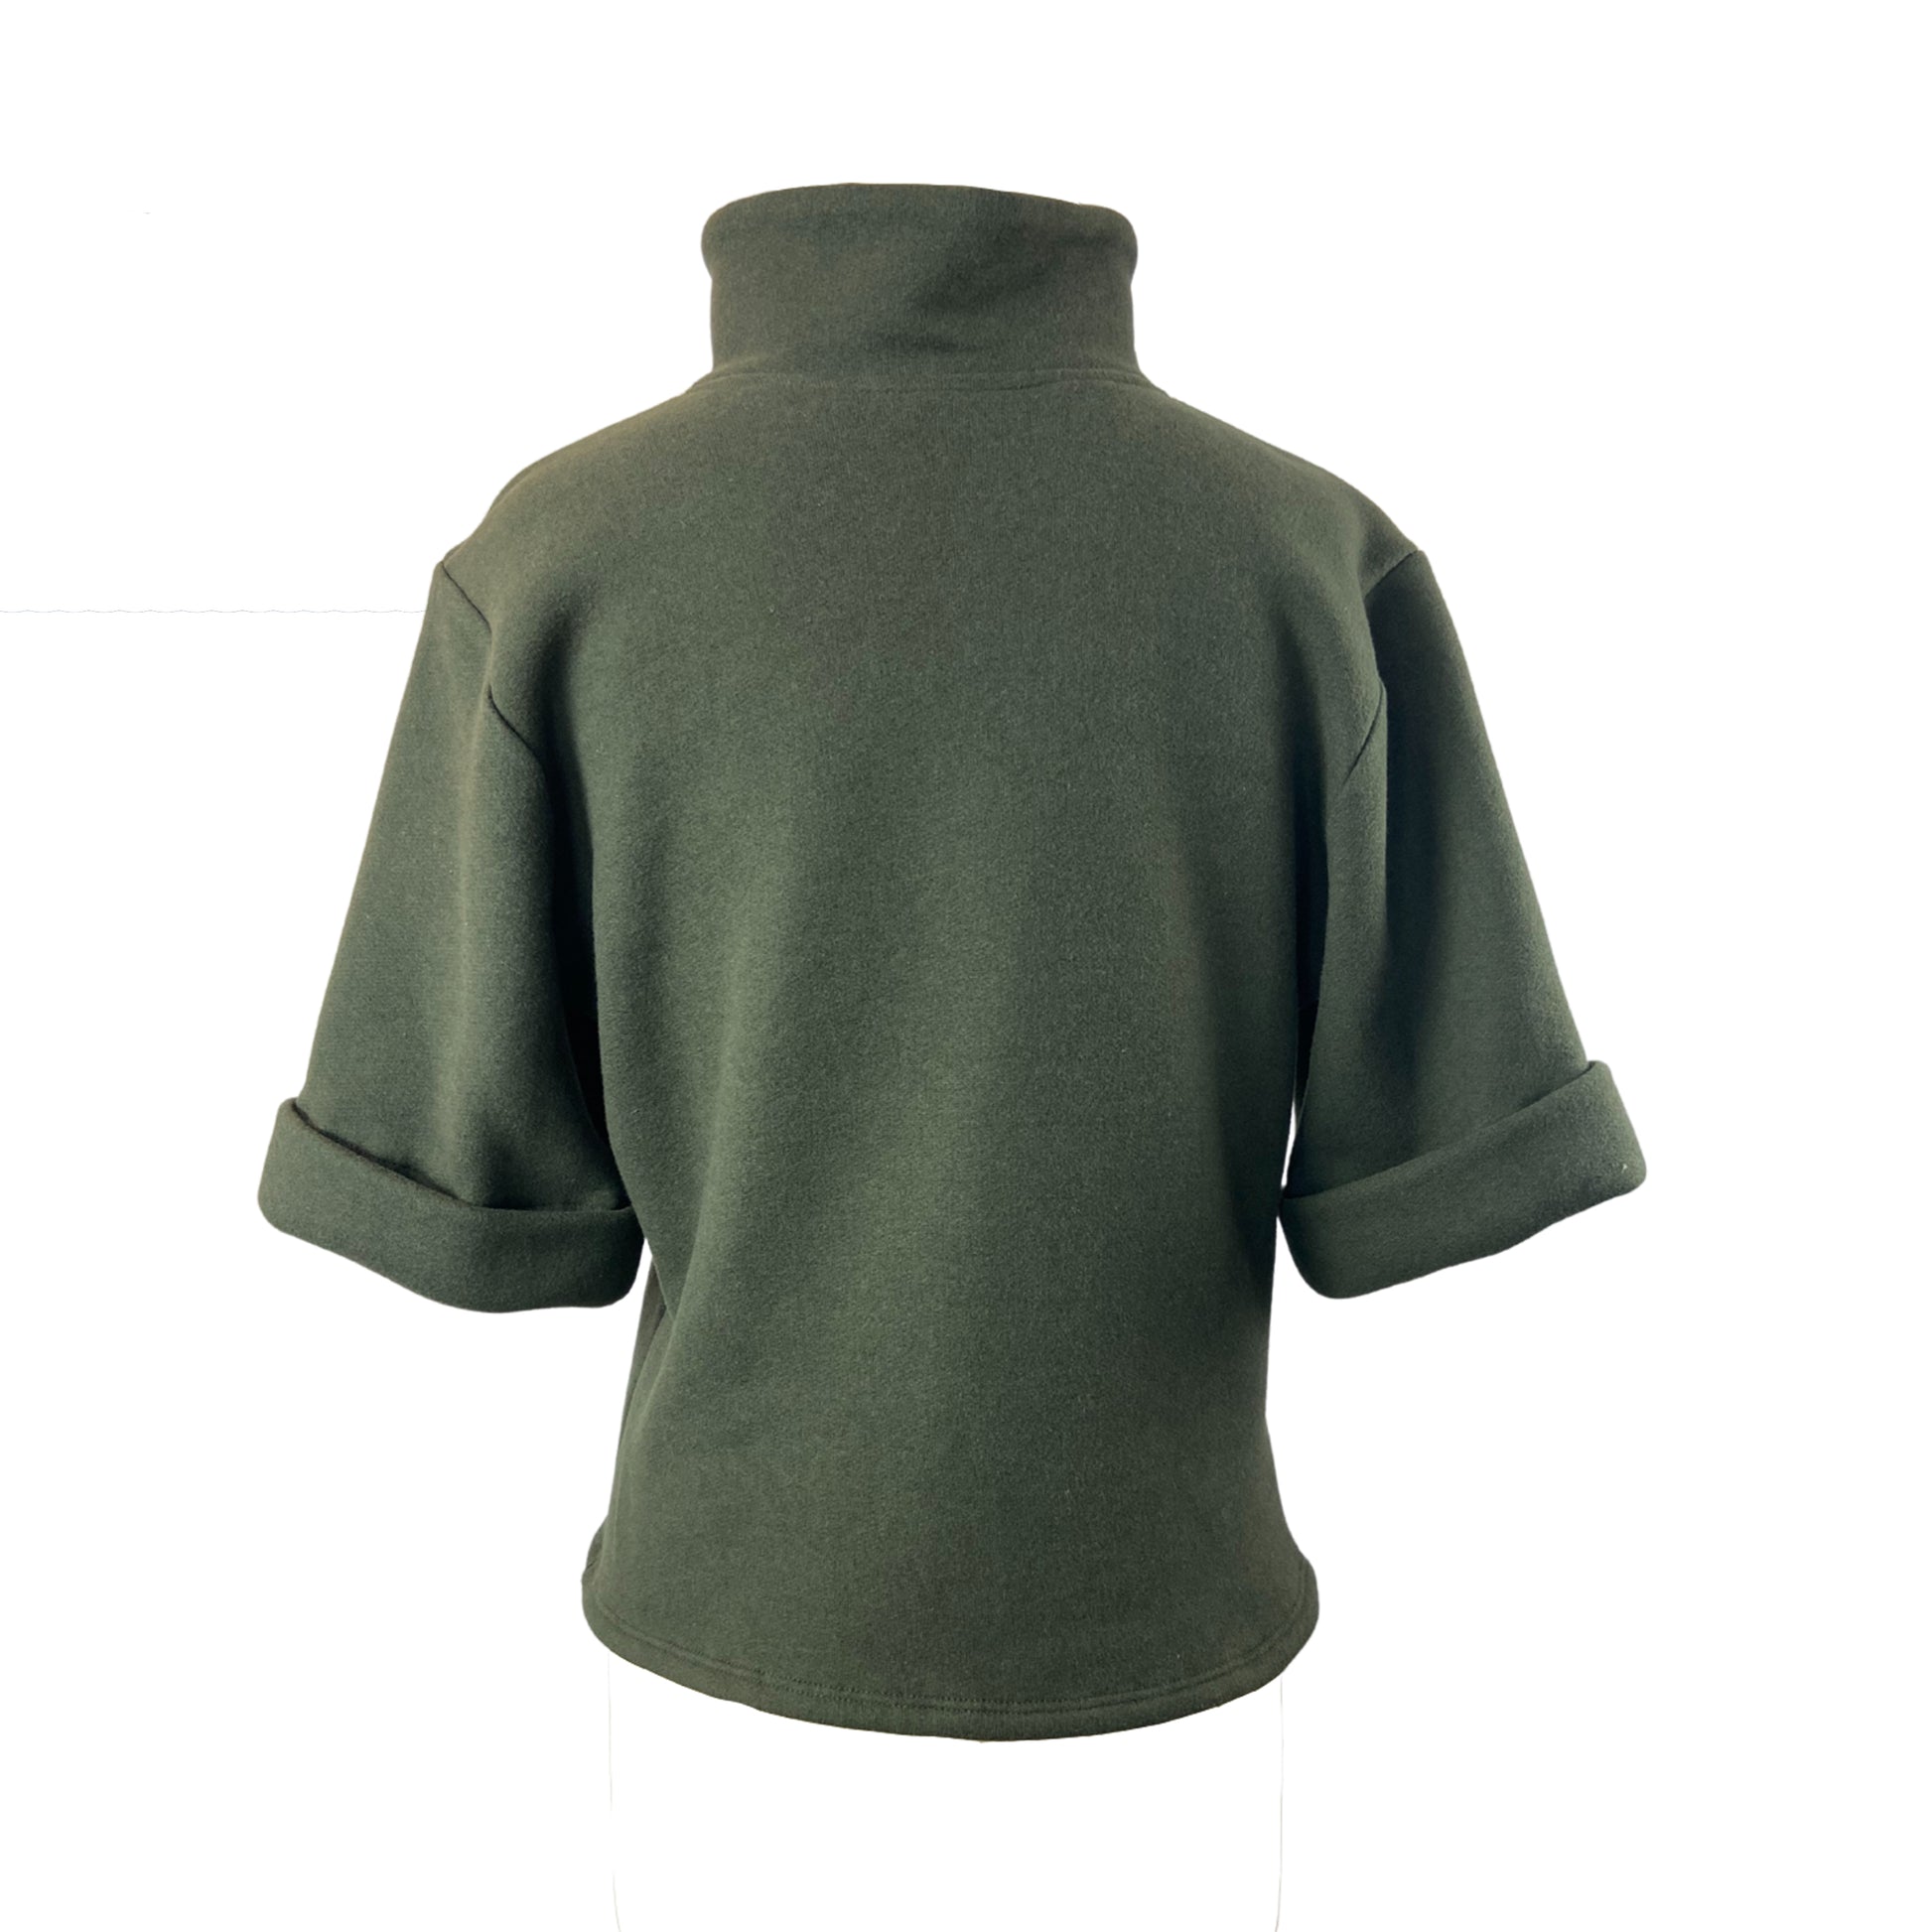 Olive sweater with short sleeves and fold over collar